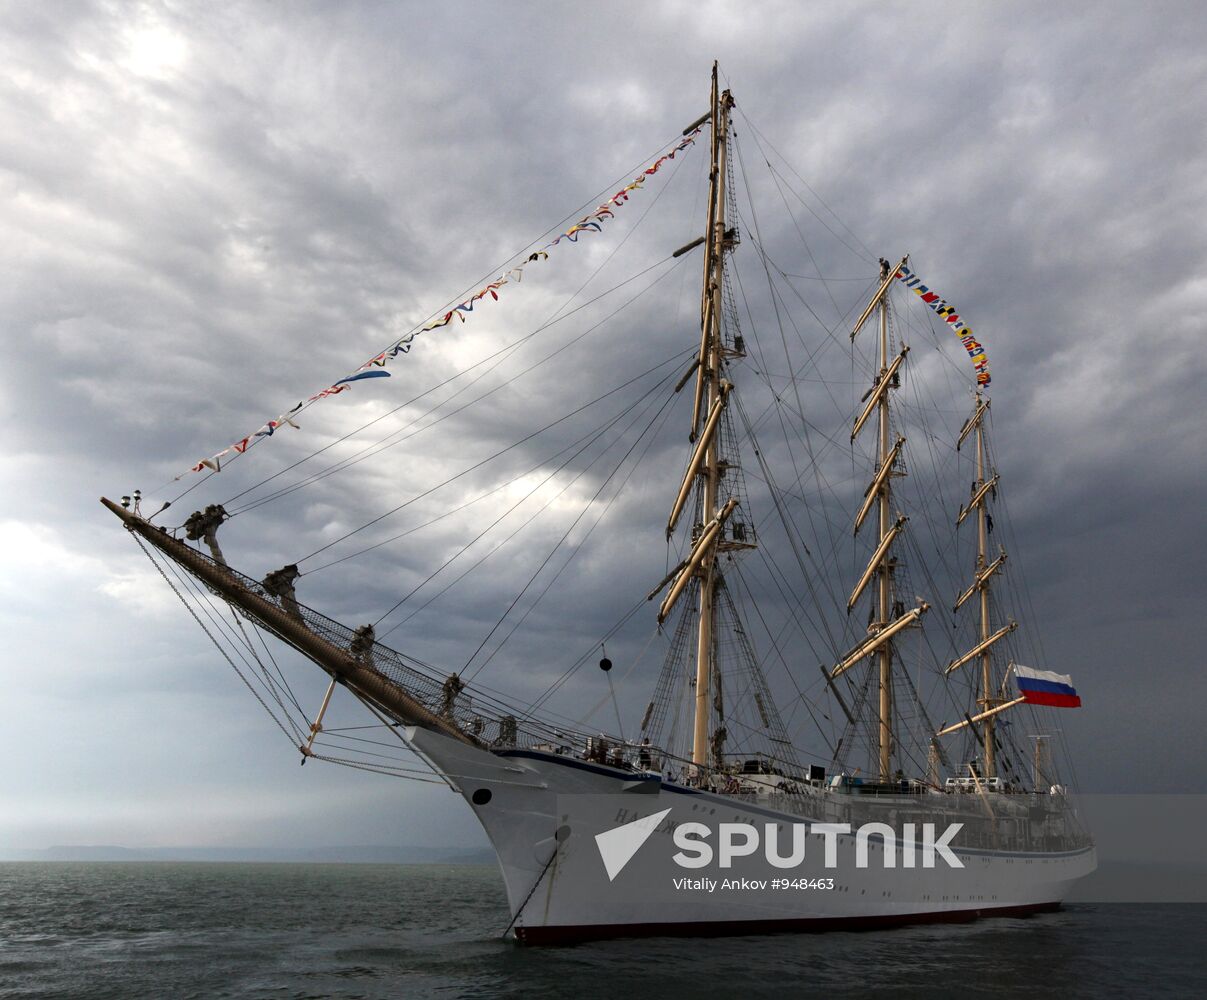 Presentation of the Pacific voyage of the sailing ship Nadezhda